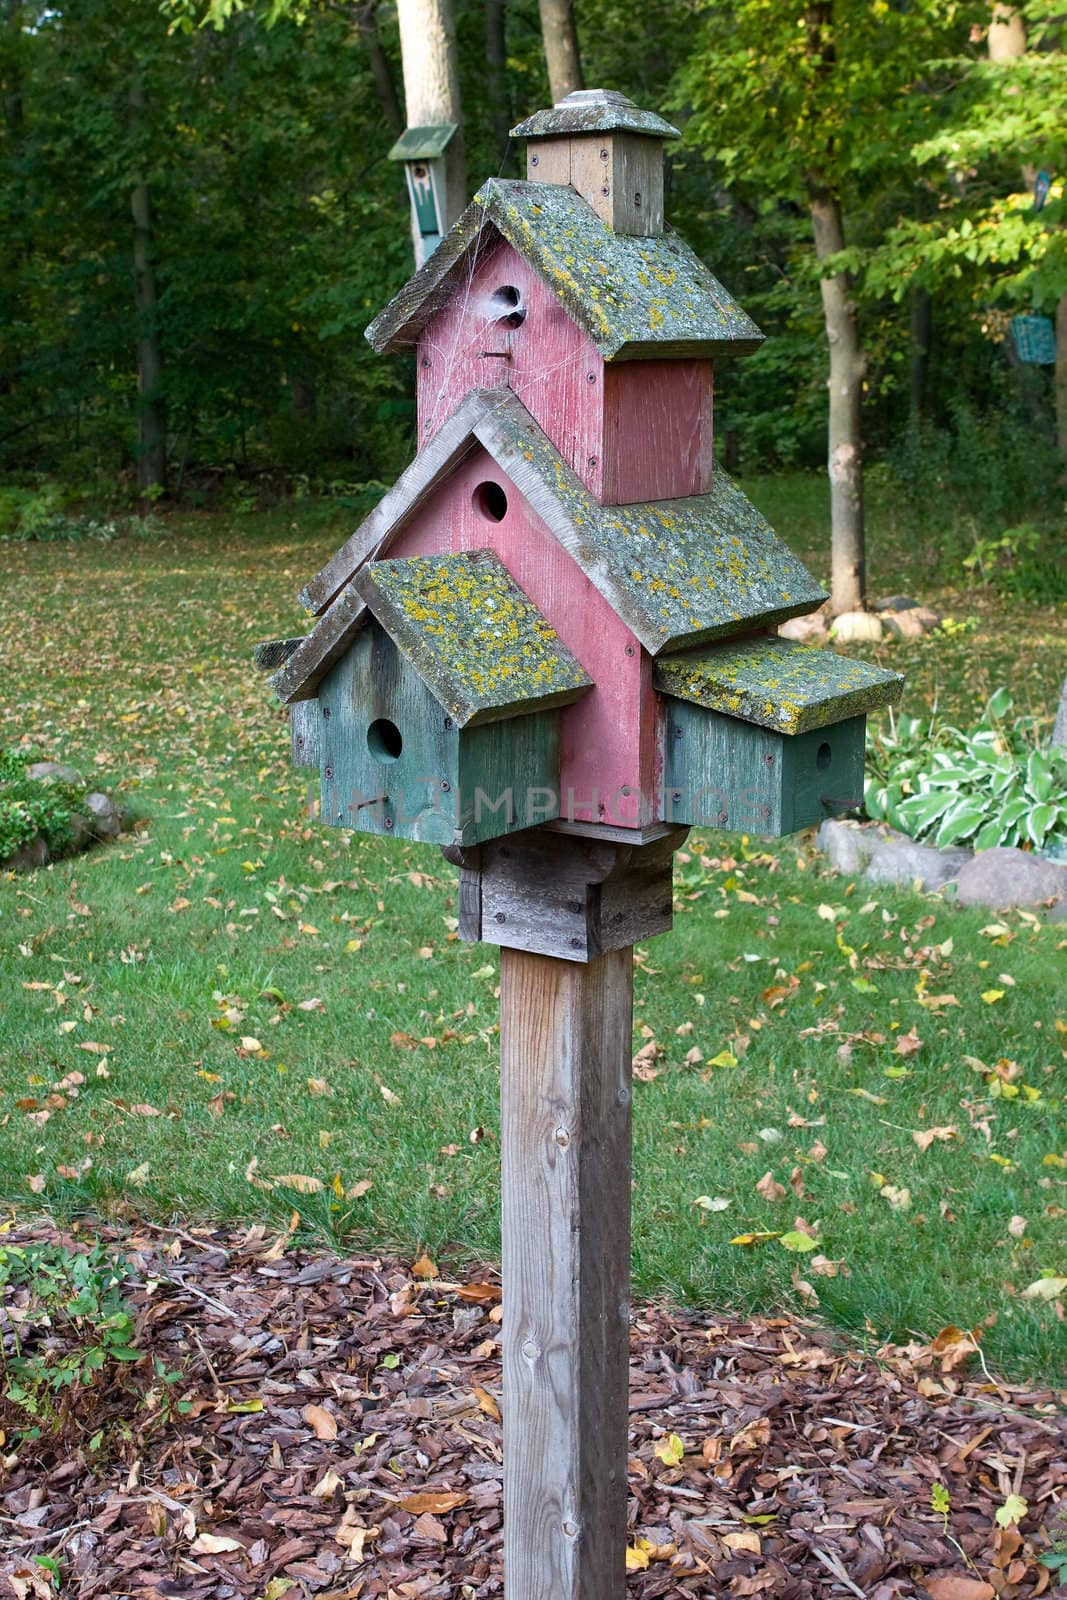 Abandoned Bird House with spider webs at the front door.